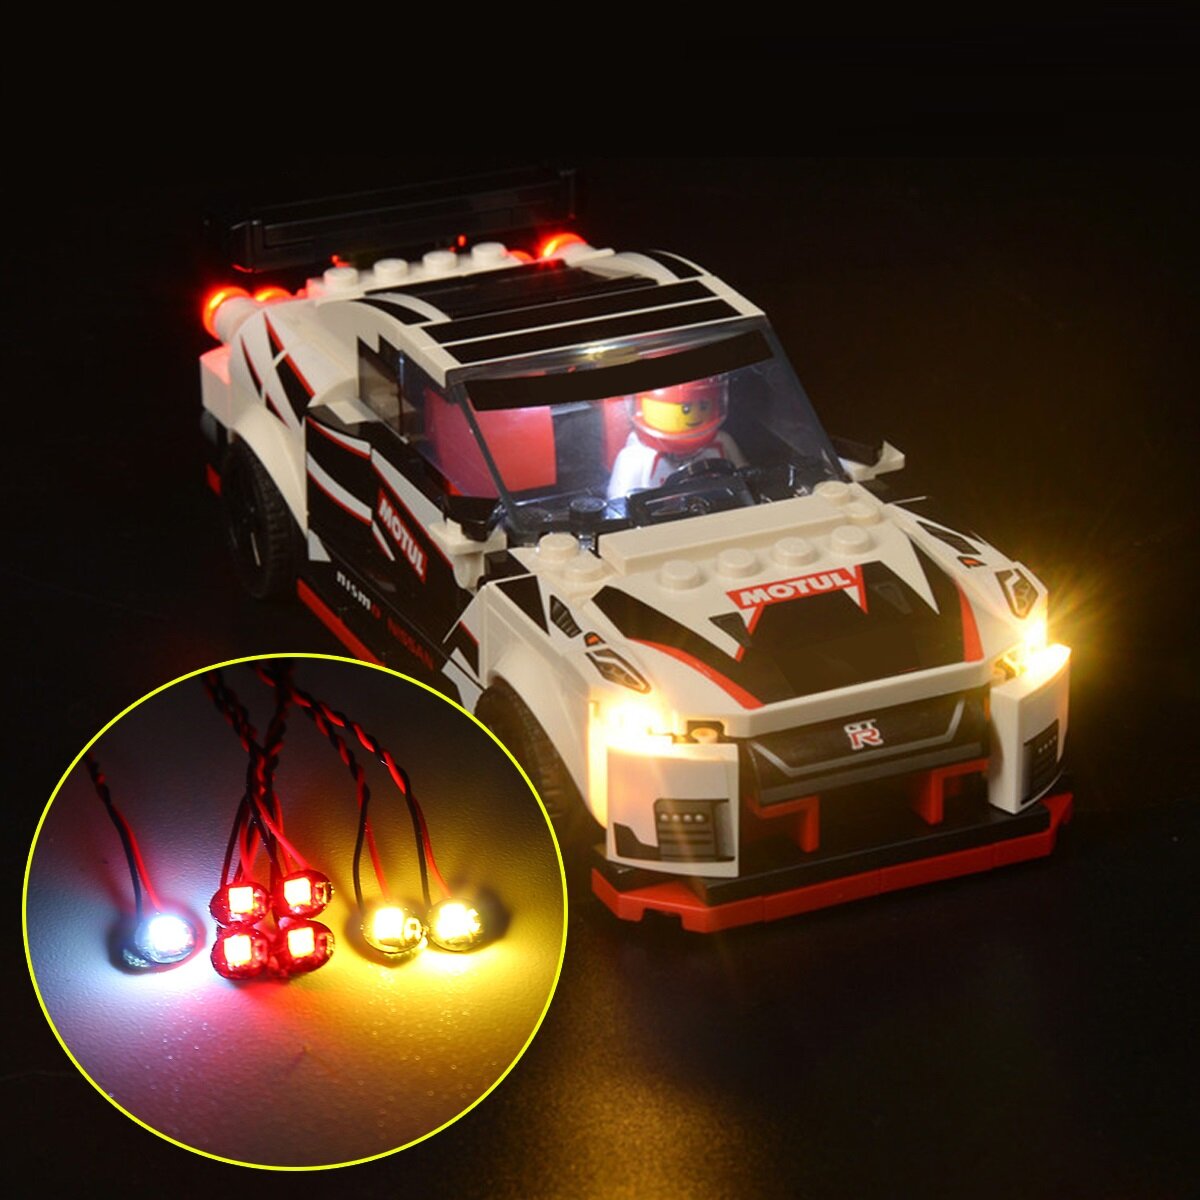 

DIY LED Light Lighting Kit ONLY For LEGO 76896 Speed Champions For Nissan GT-R NISMO Car Bricks Toy